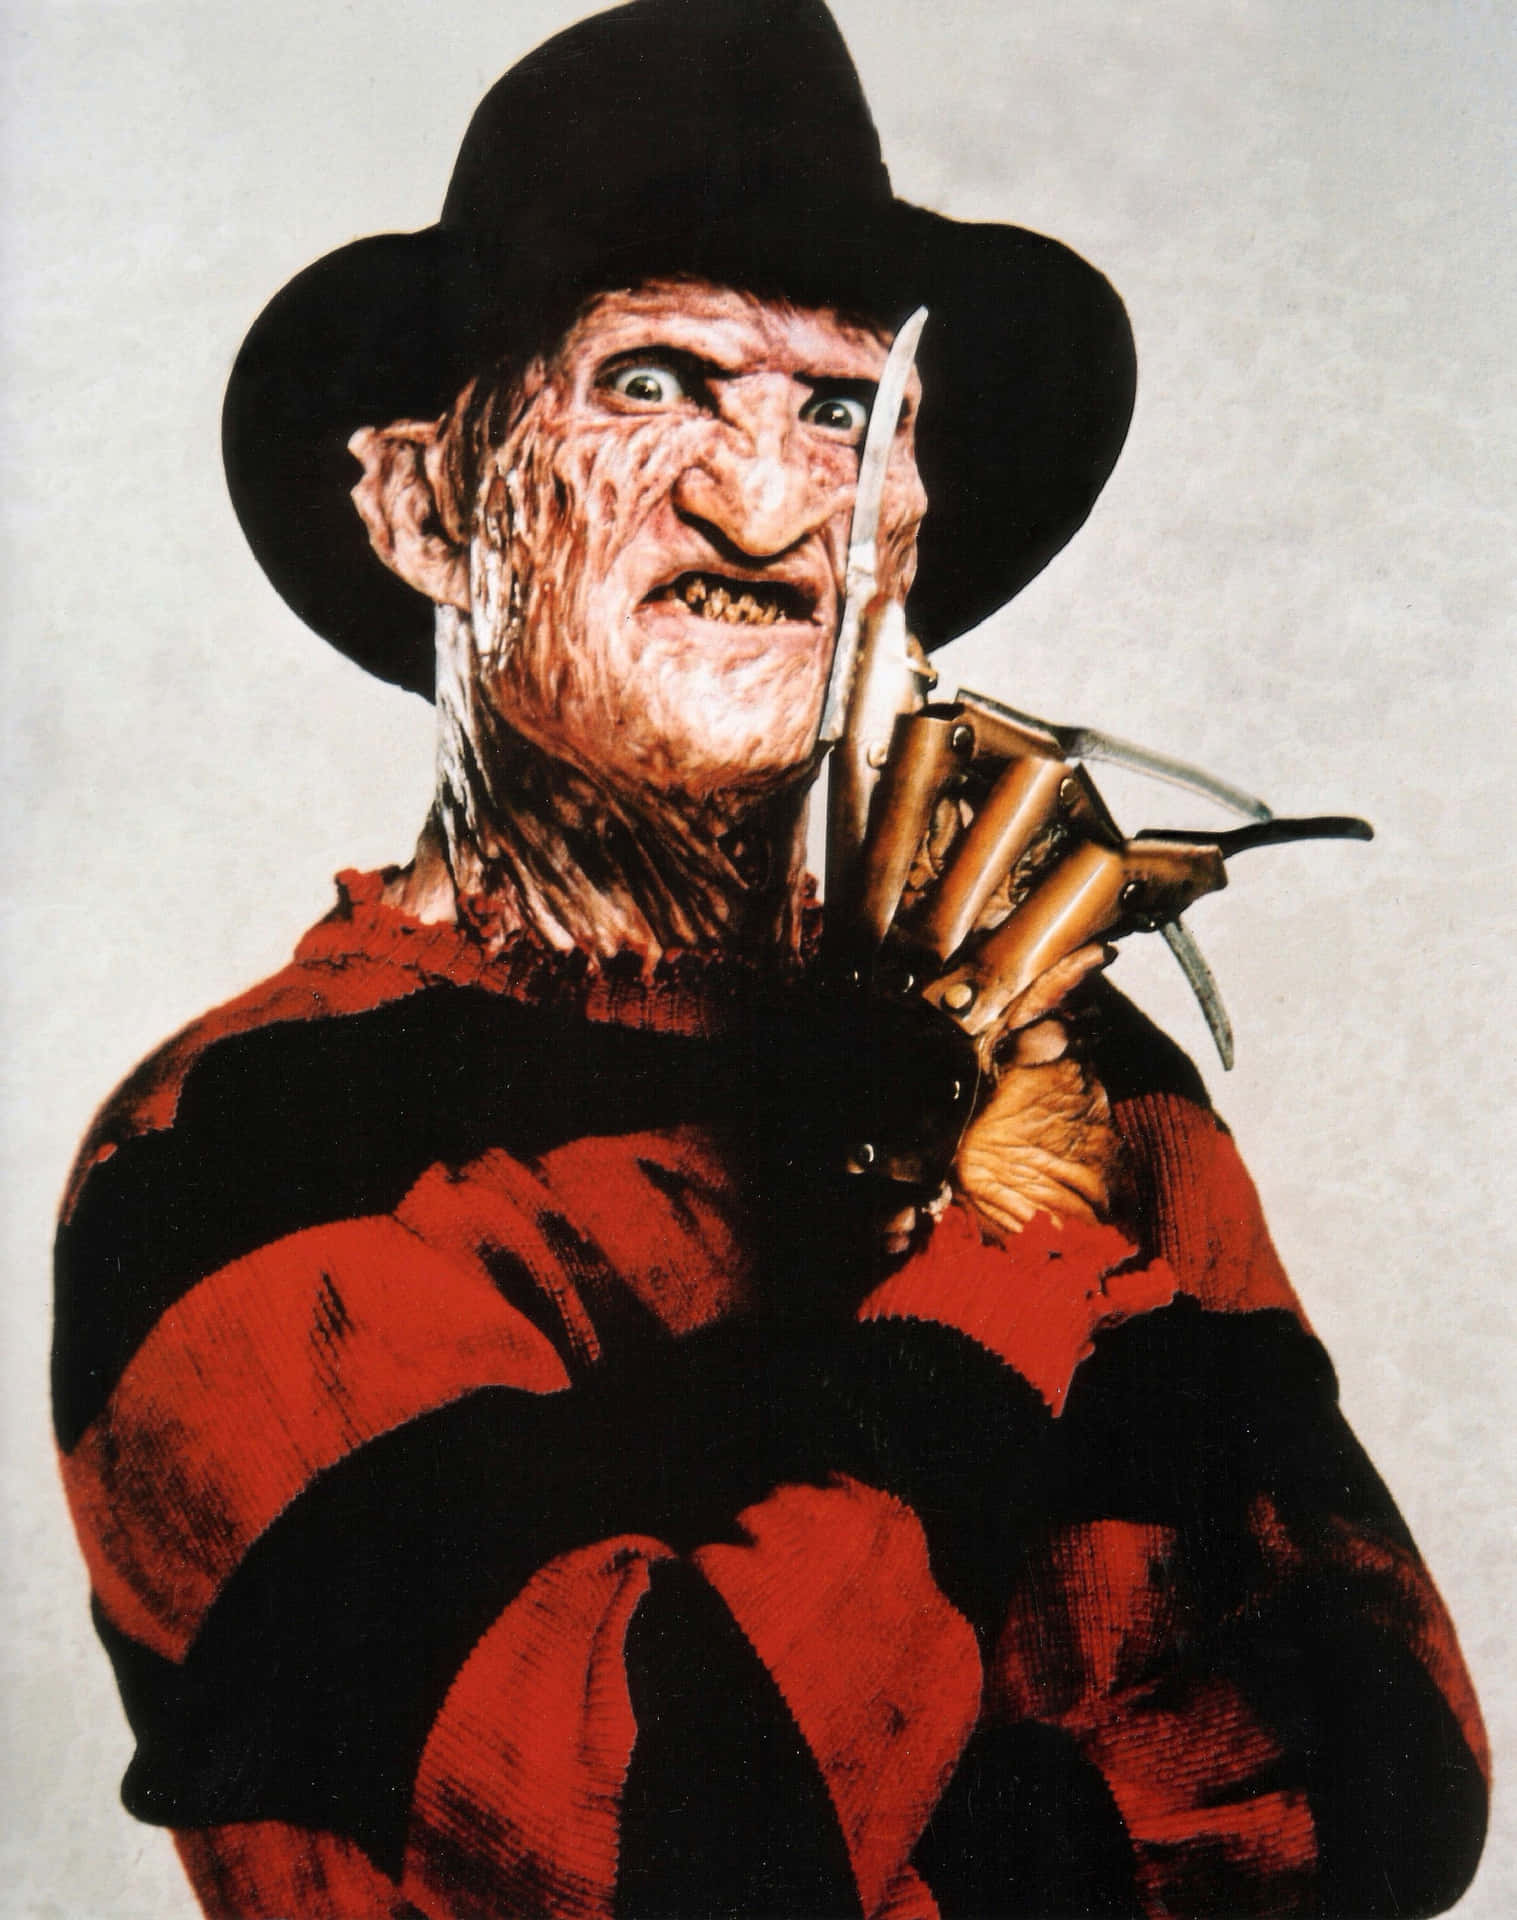 Freddy Krueger In A Striped Hat And Striped Shirt